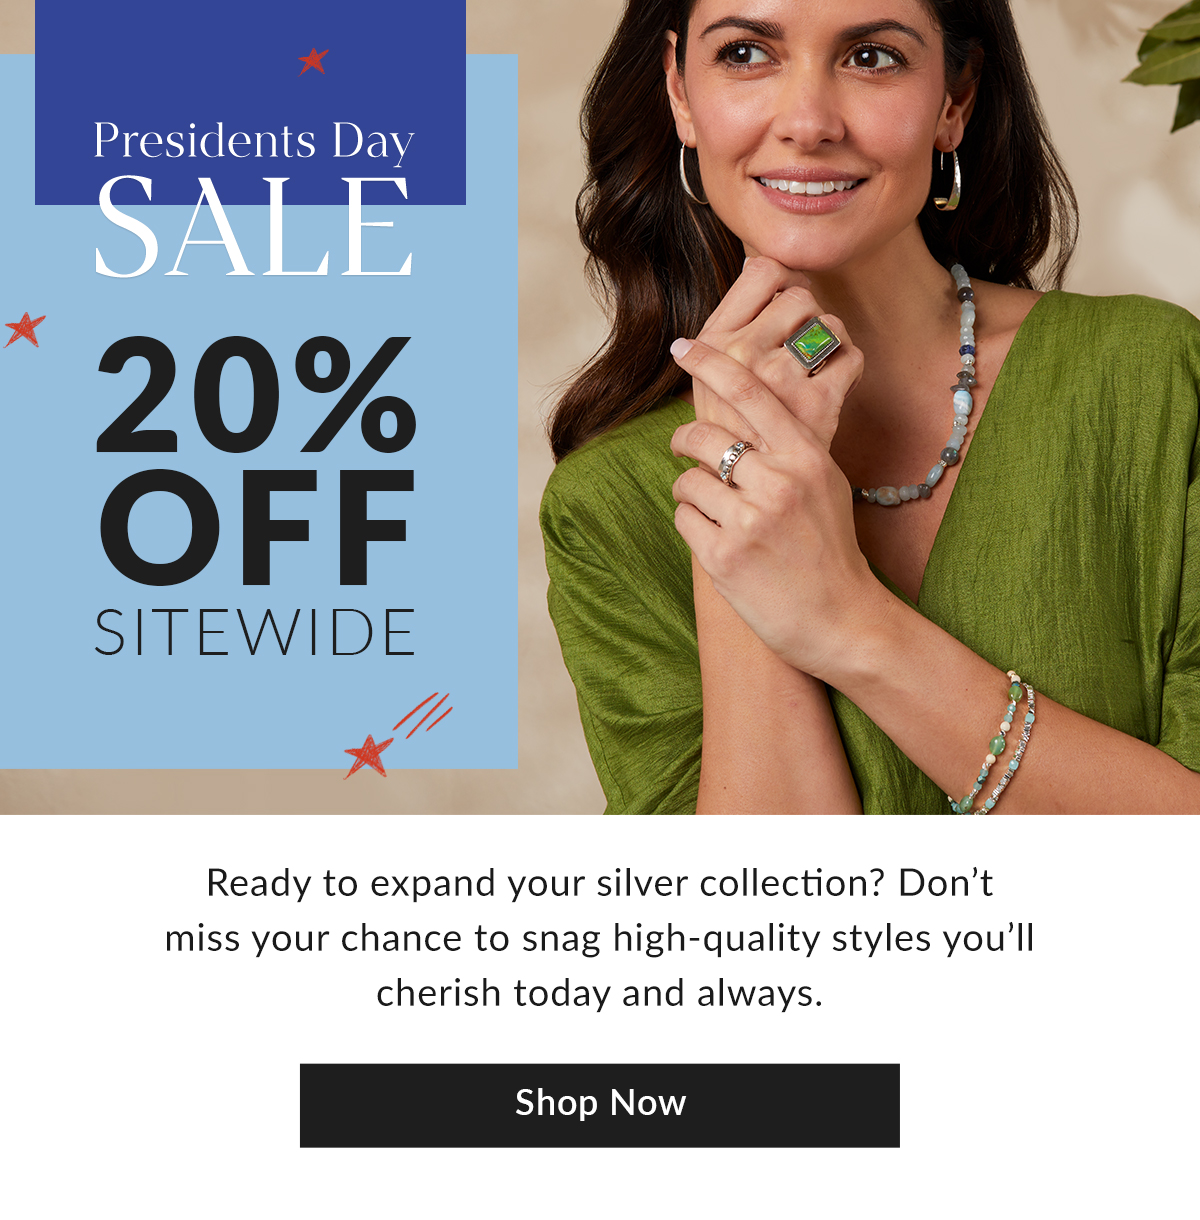 President's Day Sale: 20% Off Sitewide